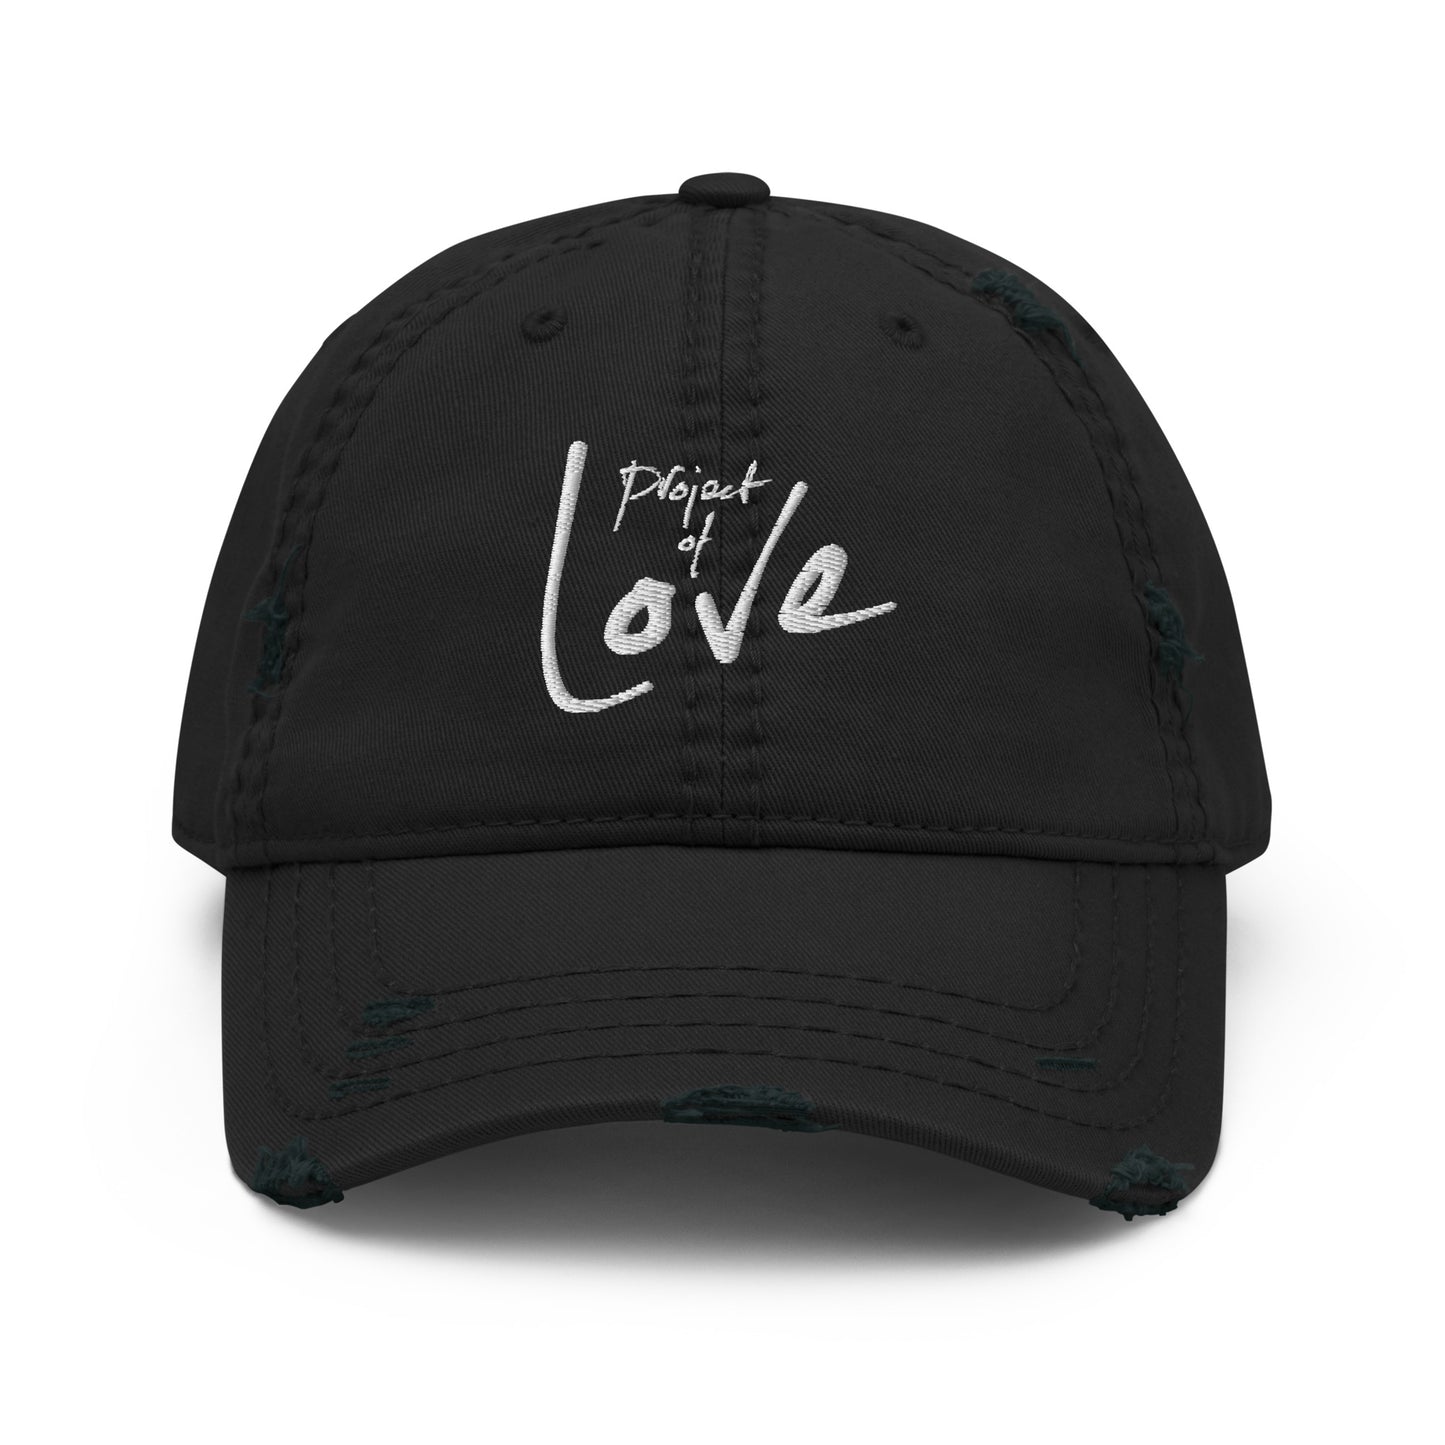 Distressed 'Project of Love' cap